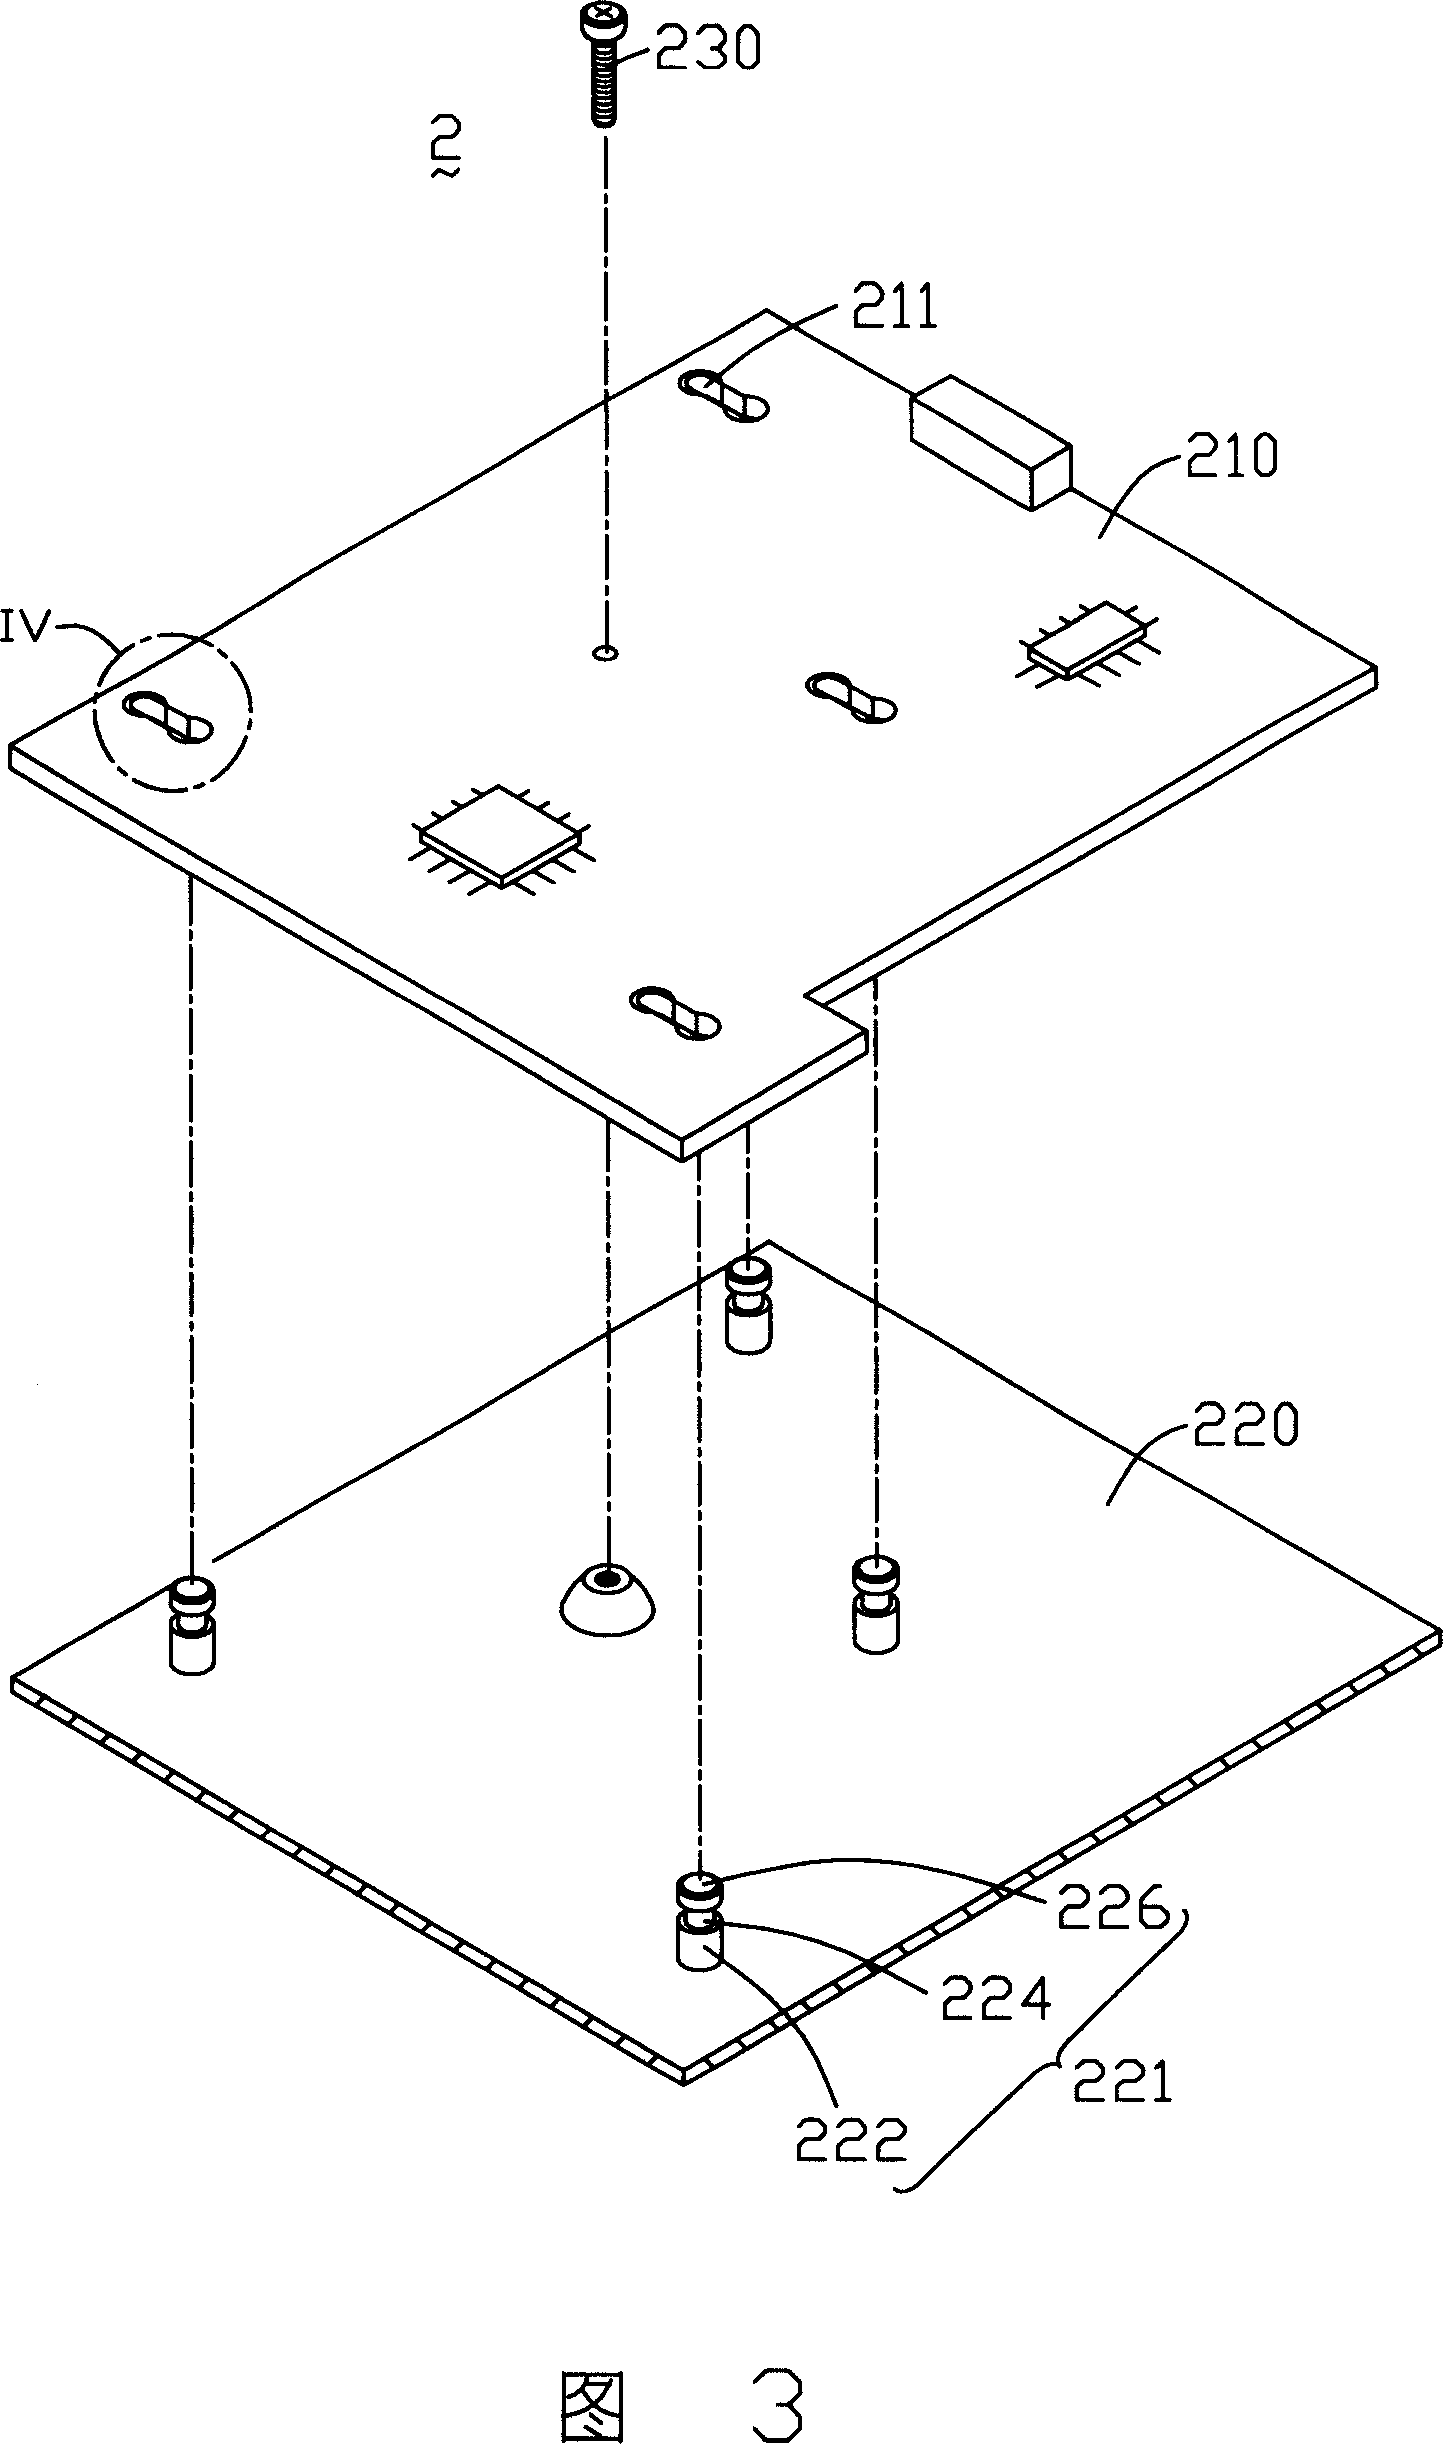 Electronic device with grounding structure